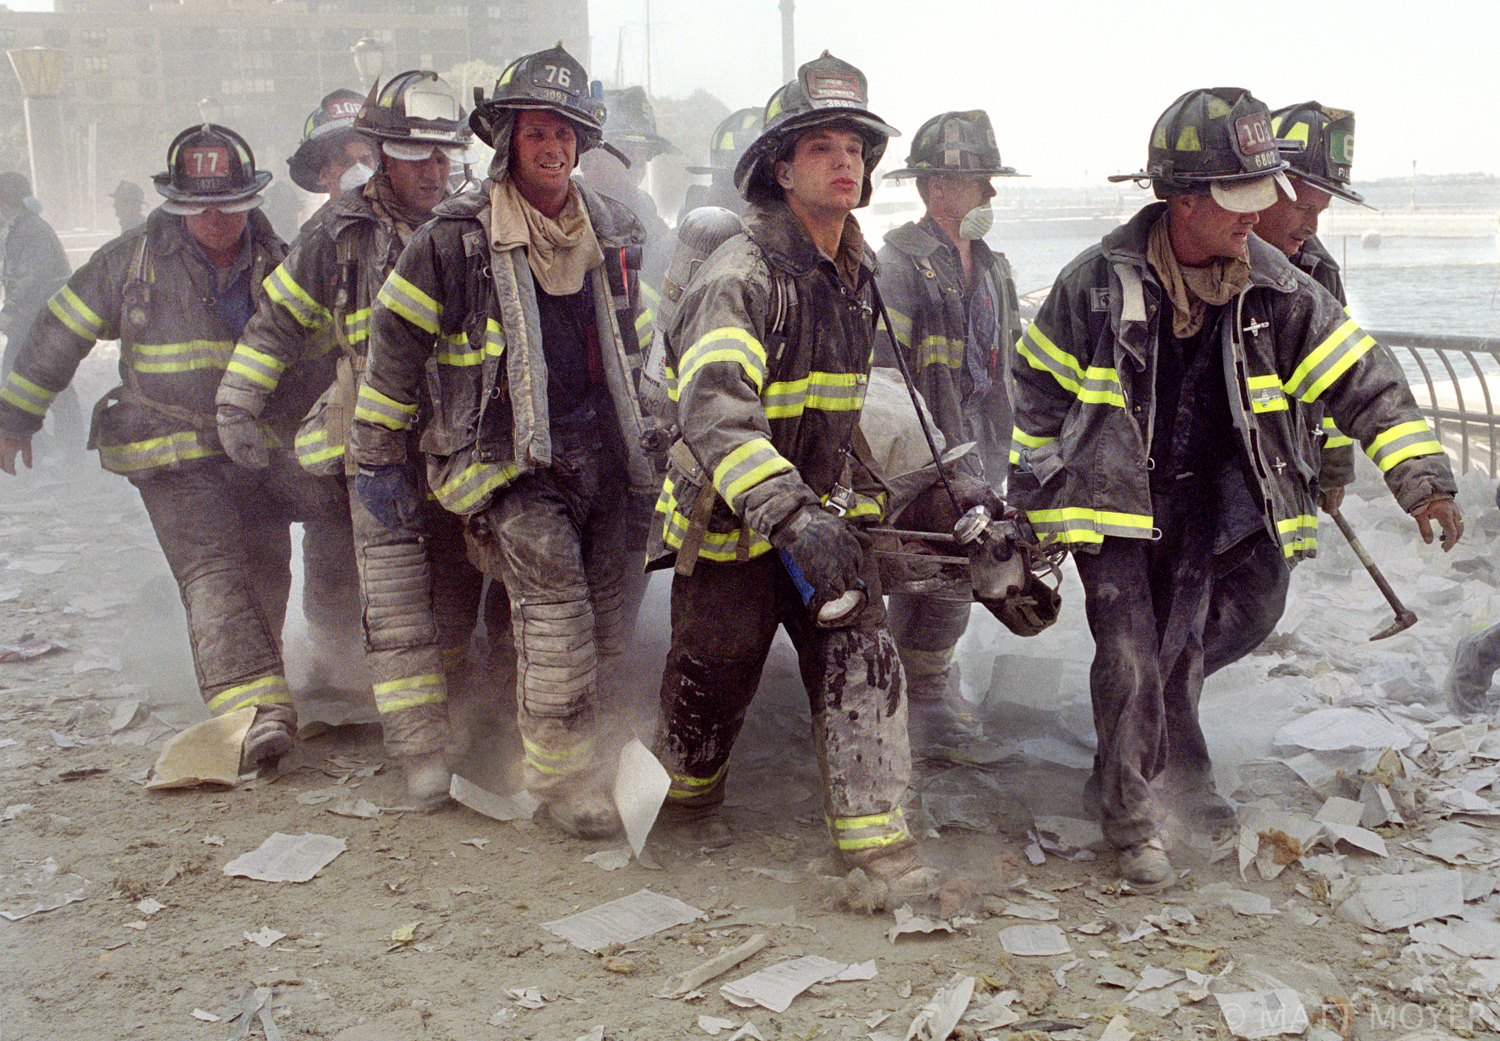  FDNY firefighters carry fellow firefighter, Al Fuentes, who was injured in the collapse of the World Trade Center on Sept. 11, 2001. 